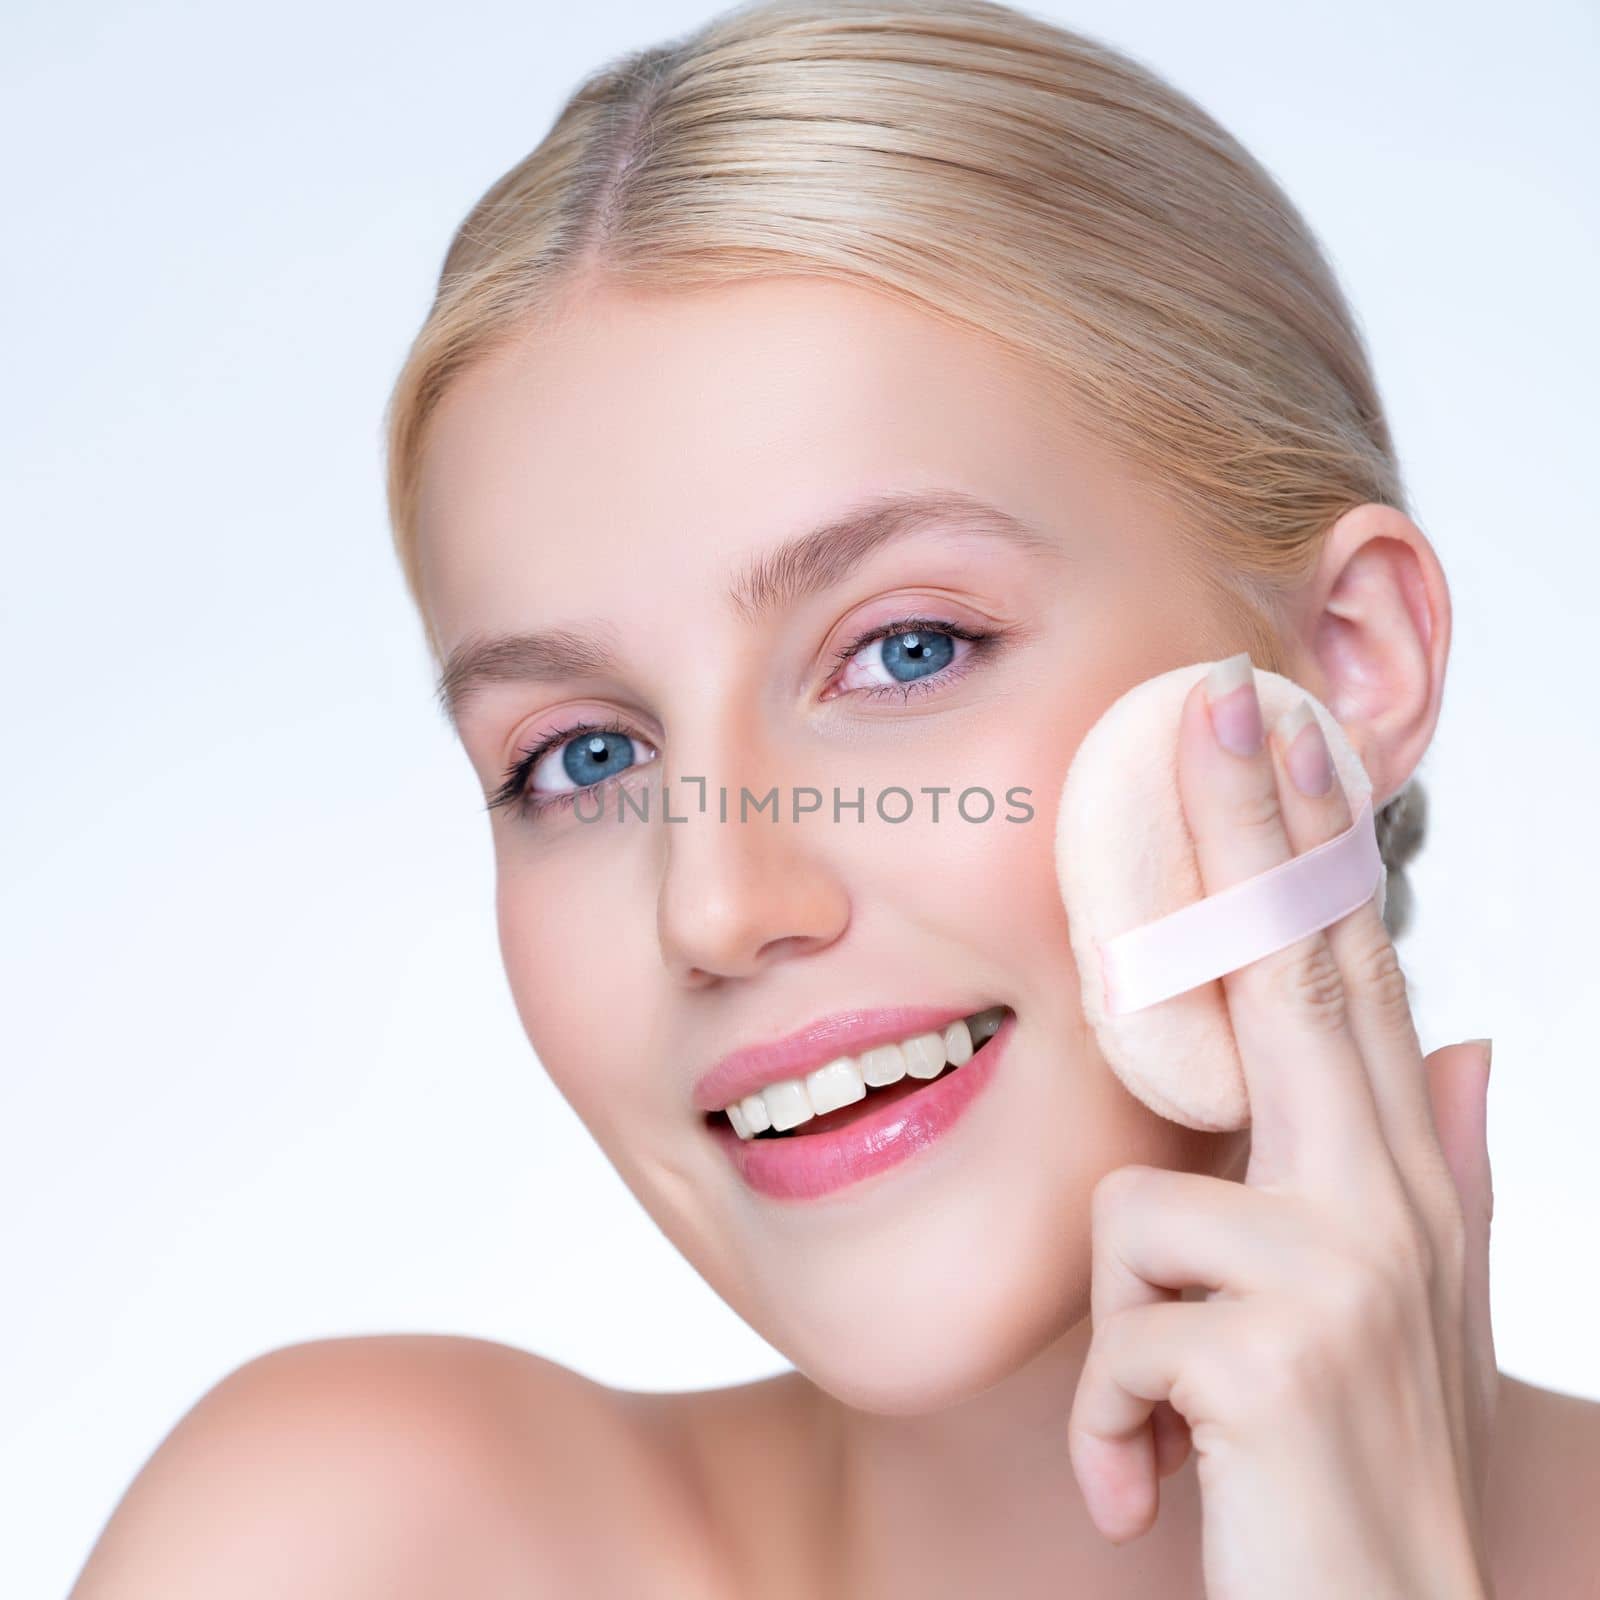 Closeup personable beautiful natural soft makeup woman using powder puff for facial makeup concept. Cushion foundation applying on young girl face in isolated background.